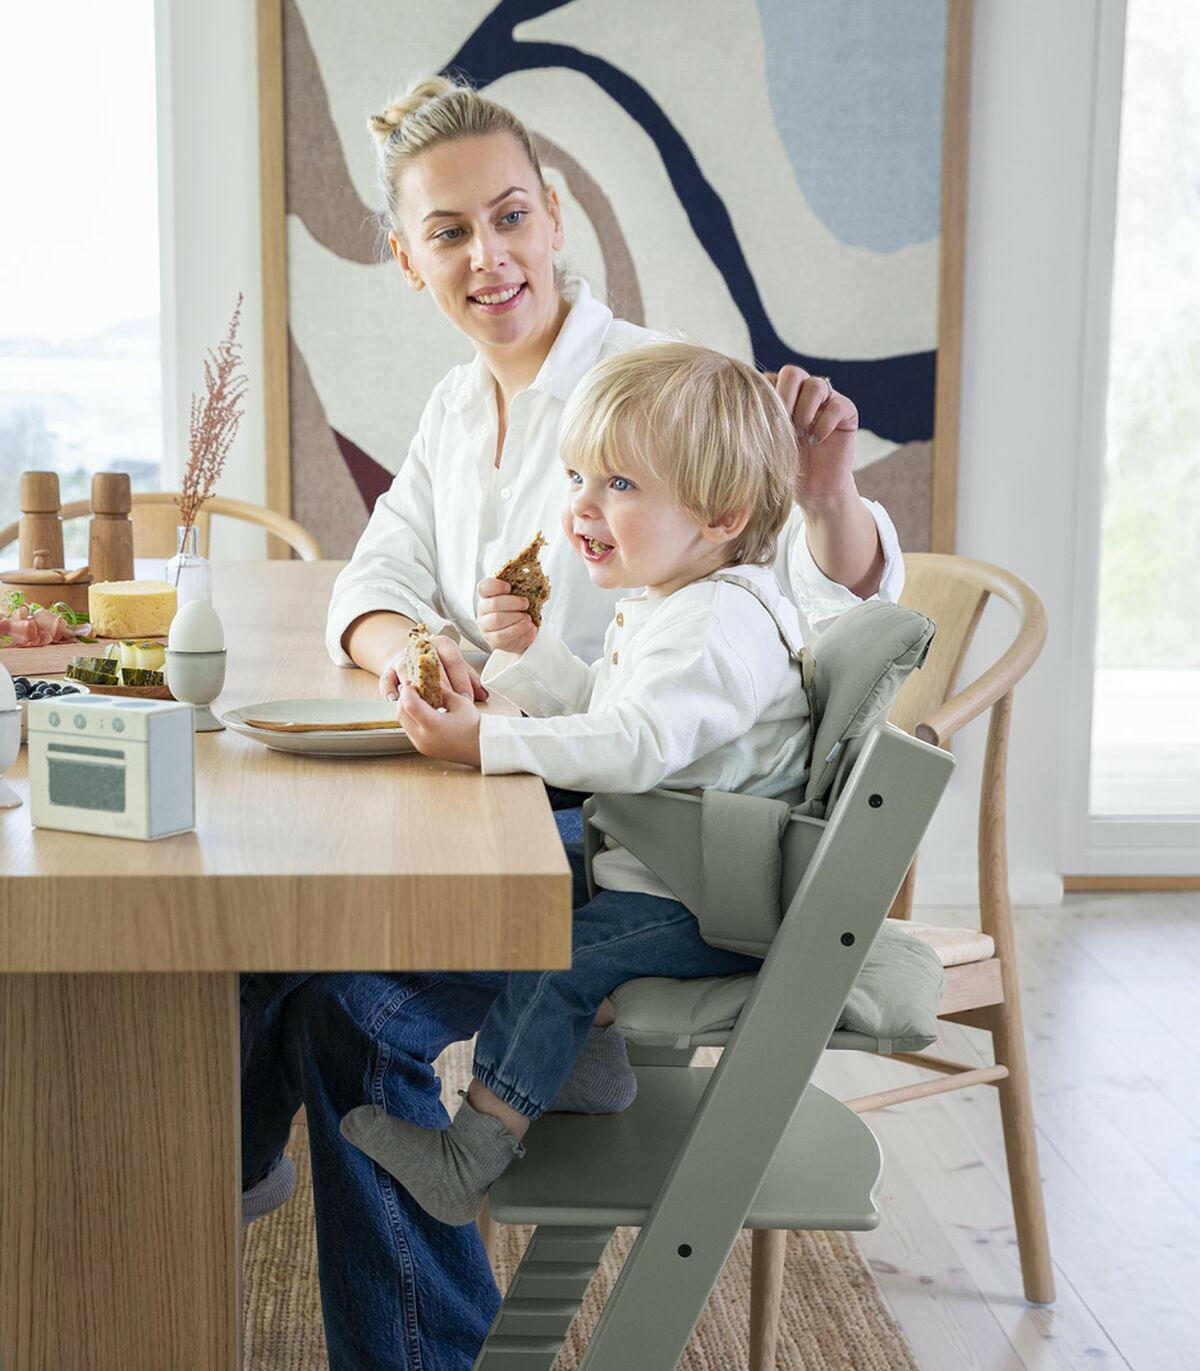 Stokke Tripp Trapp Chair-Fjord Blue - Traveling Tikes 